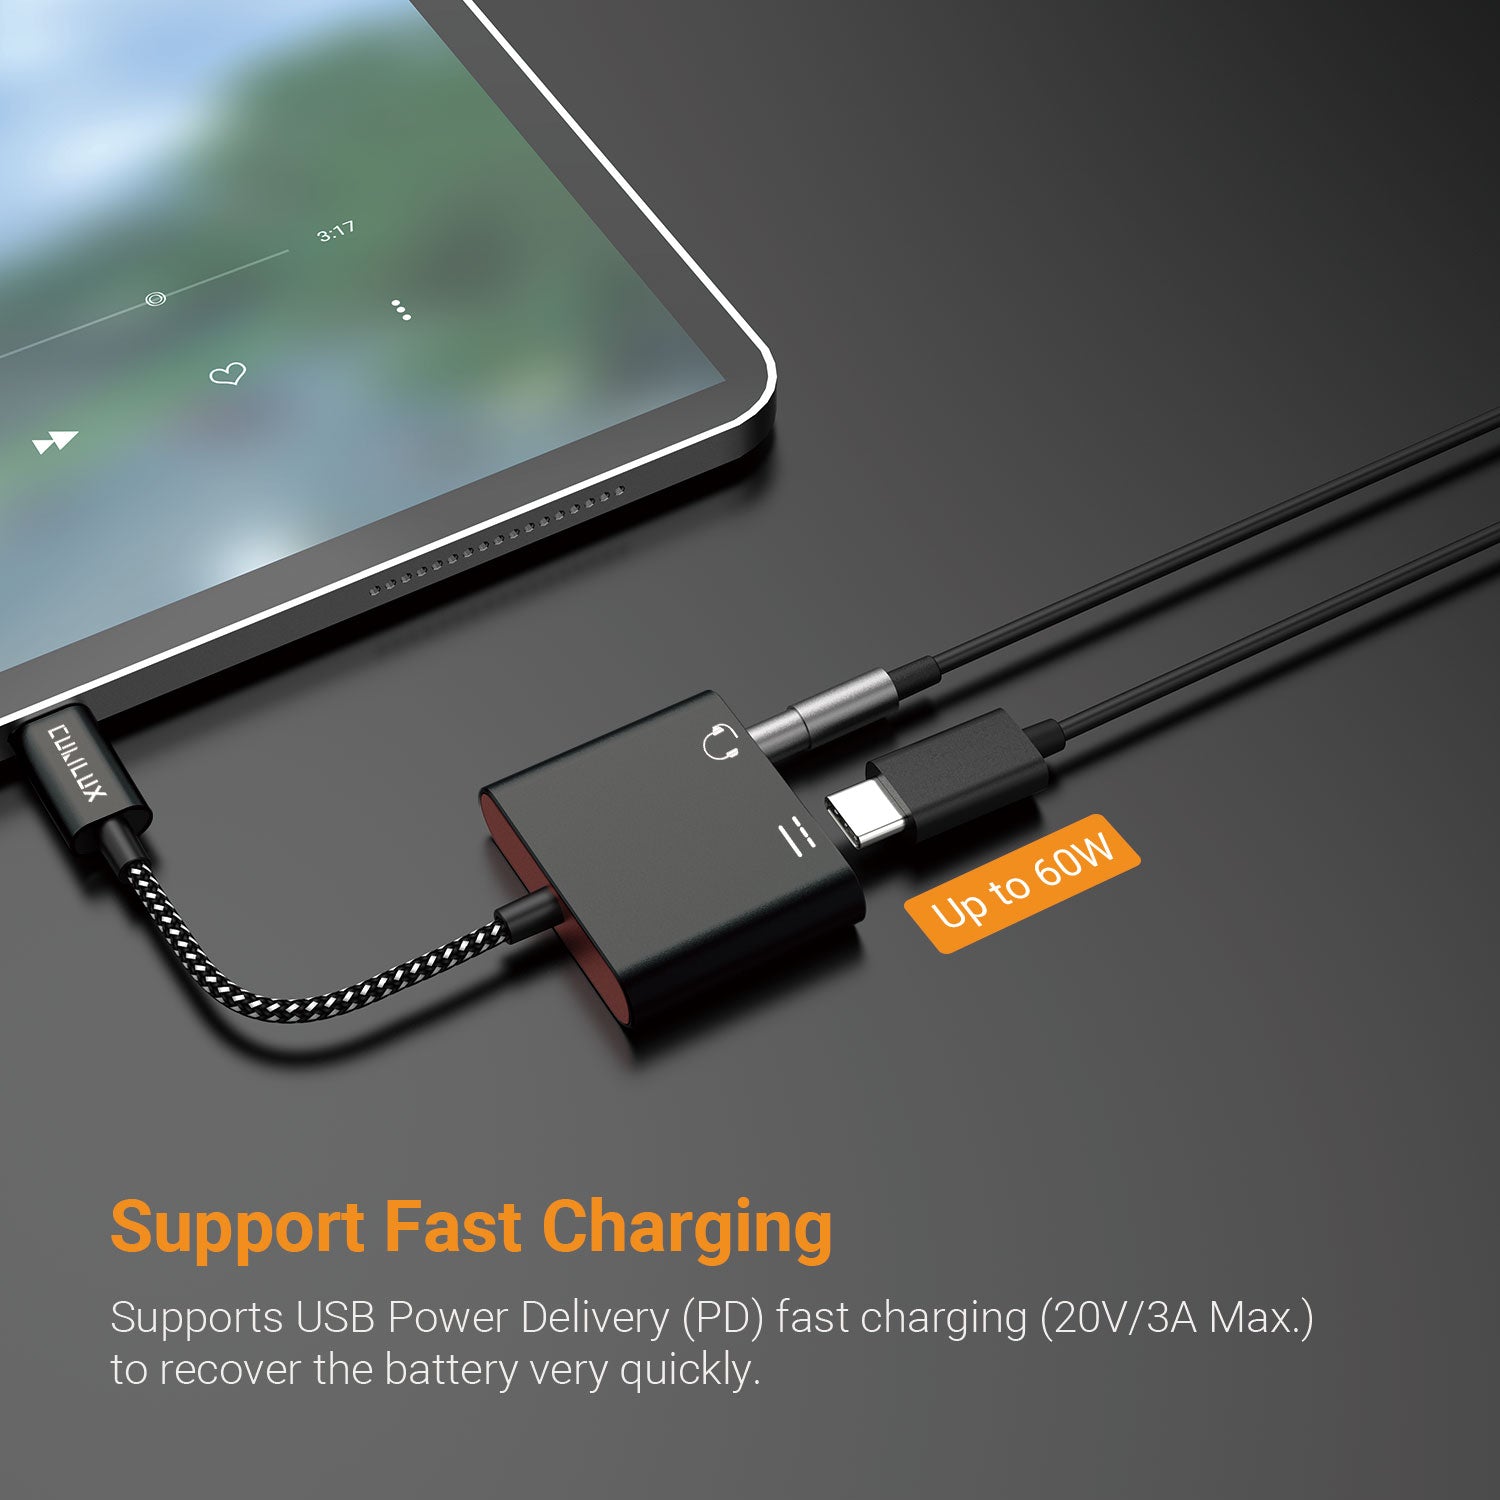 Support Fast Charging